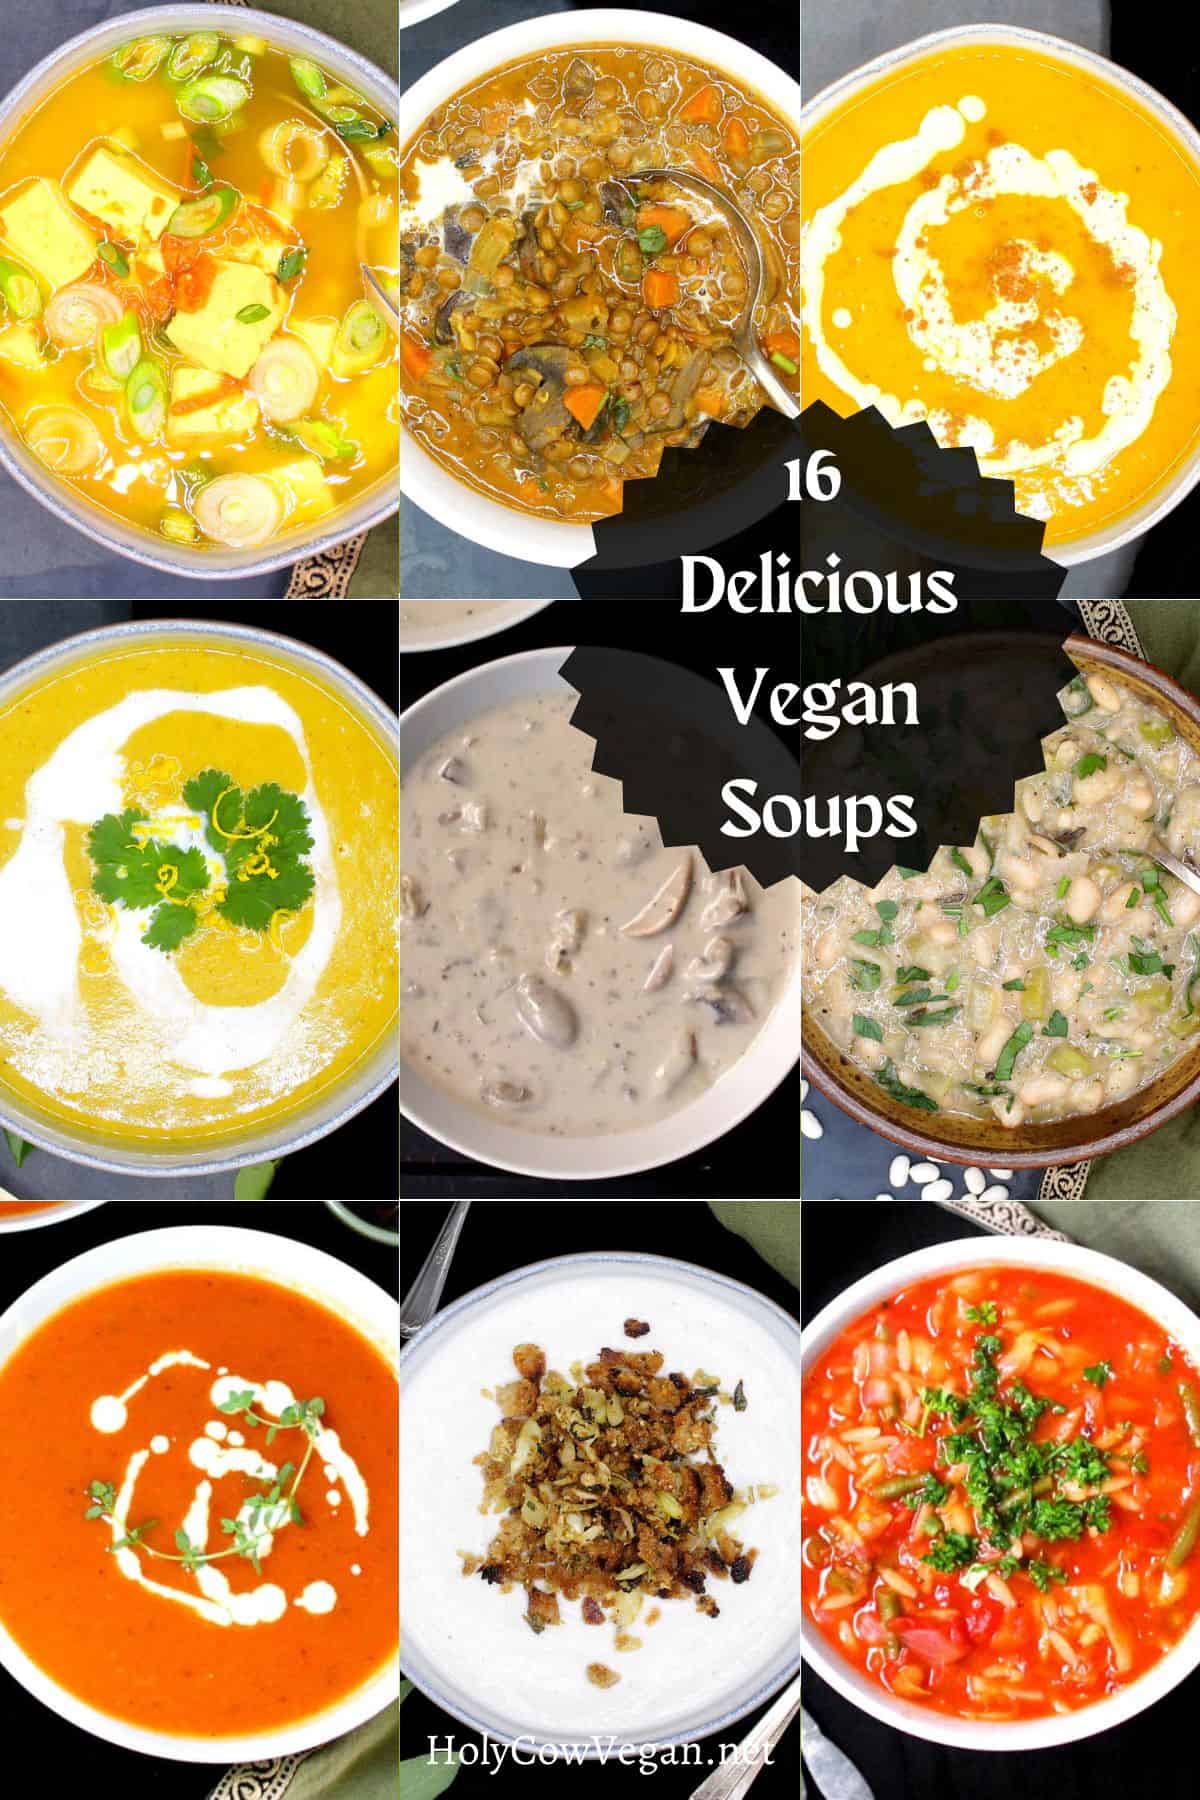 Vegan soup recipe images with text that says "16 delicious vegan soups".